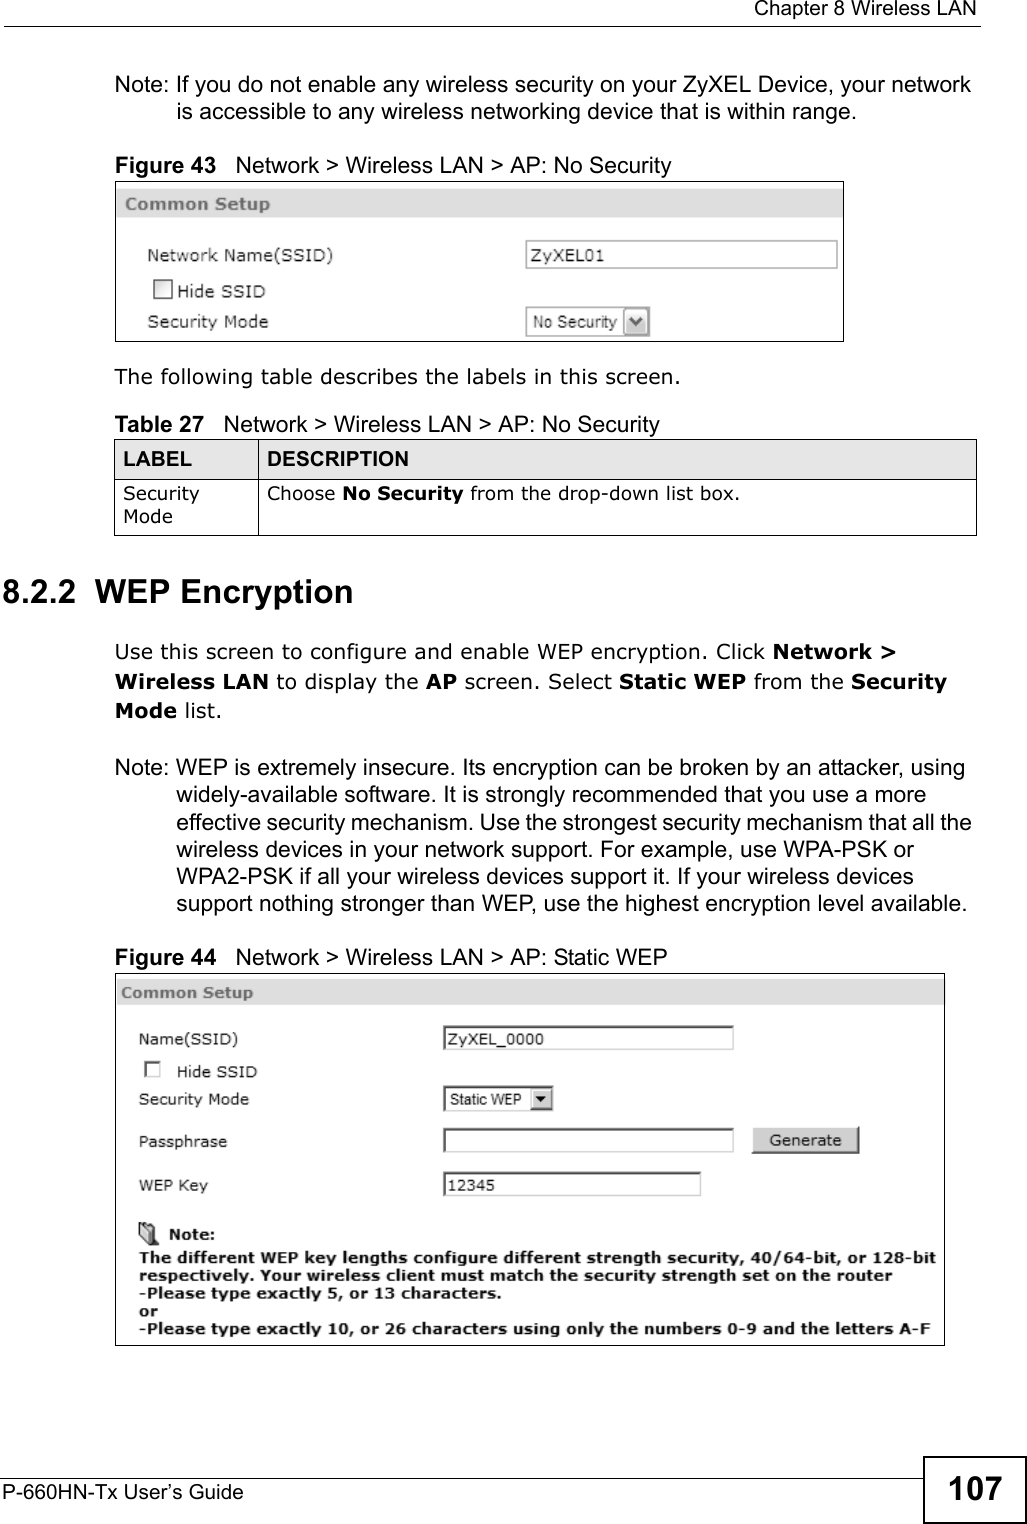  Chapter 8 Wireless LANP-660HN-Tx User’s Guide 107Note: If you do not enable any wireless security on your ZyXEL Device, your network is accessible to any wireless networking device that is within range.Figure 43   Network &gt; Wireless LAN &gt; AP: No SecurityThe following table describes the labels in this screen.8.2.2  WEP EncryptionUse this screen to configure and enable WEP encryption. Click Network &gt; Wireless LAN to display the AP screen. Select Static WEP from the Security Mode list.Note: WEP is extremely insecure. Its encryption can be broken by an attacker, using widely-available software. It is strongly recommended that you use a more effective security mechanism. Use the strongest security mechanism that all the wireless devices in your network support. For example, use WPA-PSK or WPA2-PSK if all your wireless devices support it. If your wireless devices support nothing stronger than WEP, use the highest encryption level available.Figure 44   Network &gt; Wireless LAN &gt; AP: Static WEPTable 27   Network &gt; Wireless LAN &gt; AP: No SecurityLABEL DESCRIPTIONSecurity ModeChoose No Security from the drop-down list box.